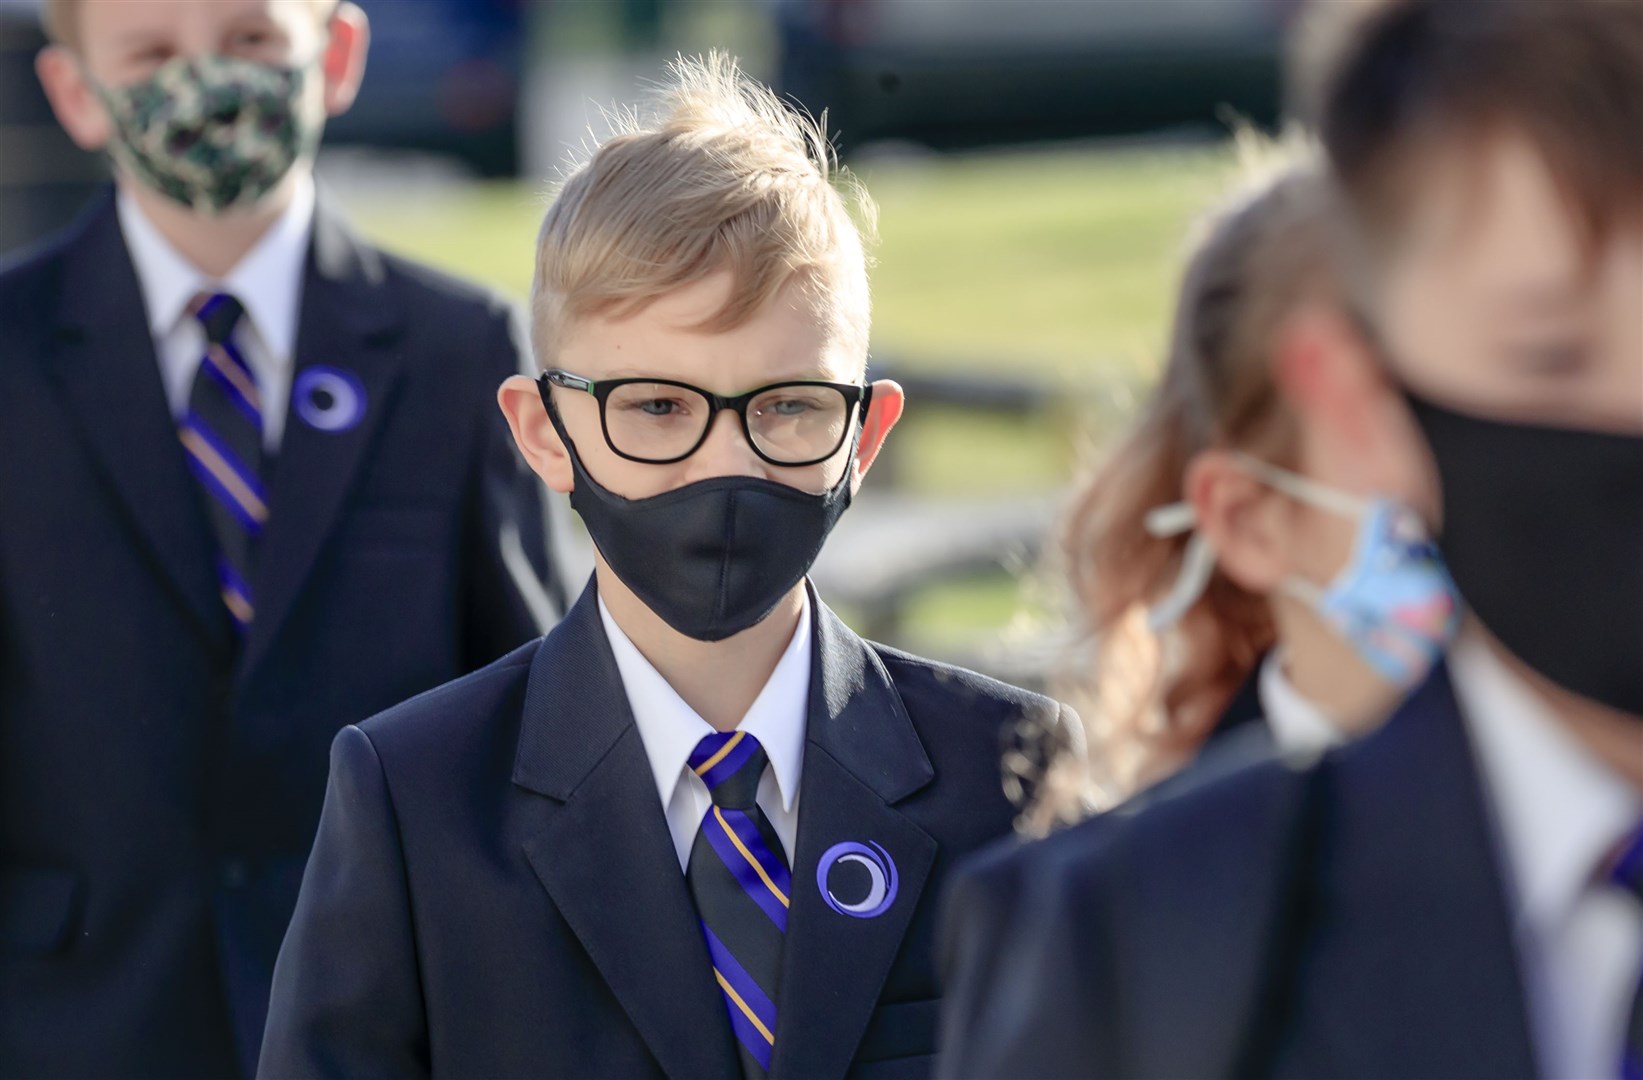 Pupils wear protective face masks as schools in England reopen (Danny Lawson/PA)